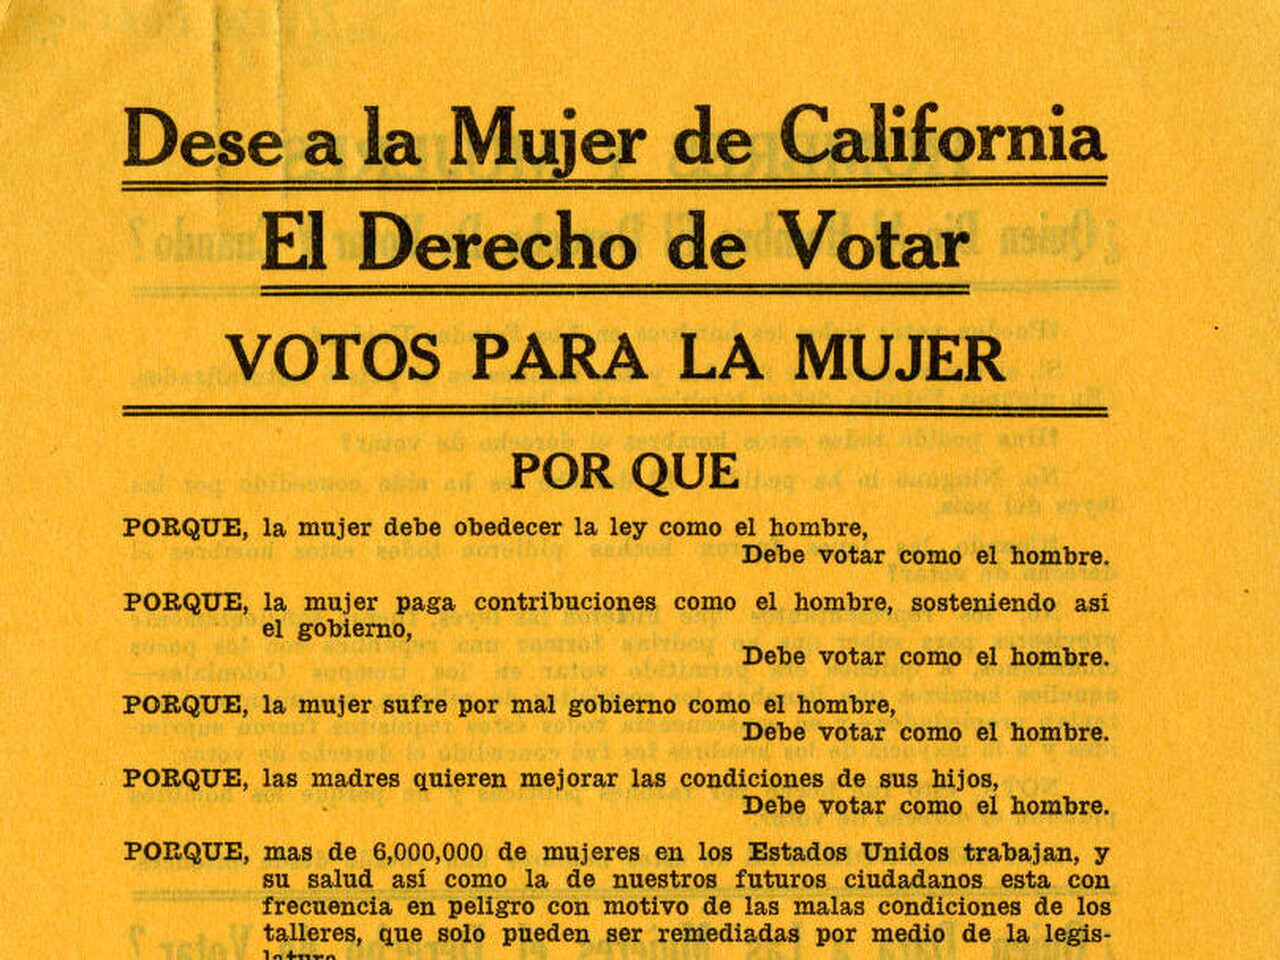 Flyer in Spanish pertaining to voting in California